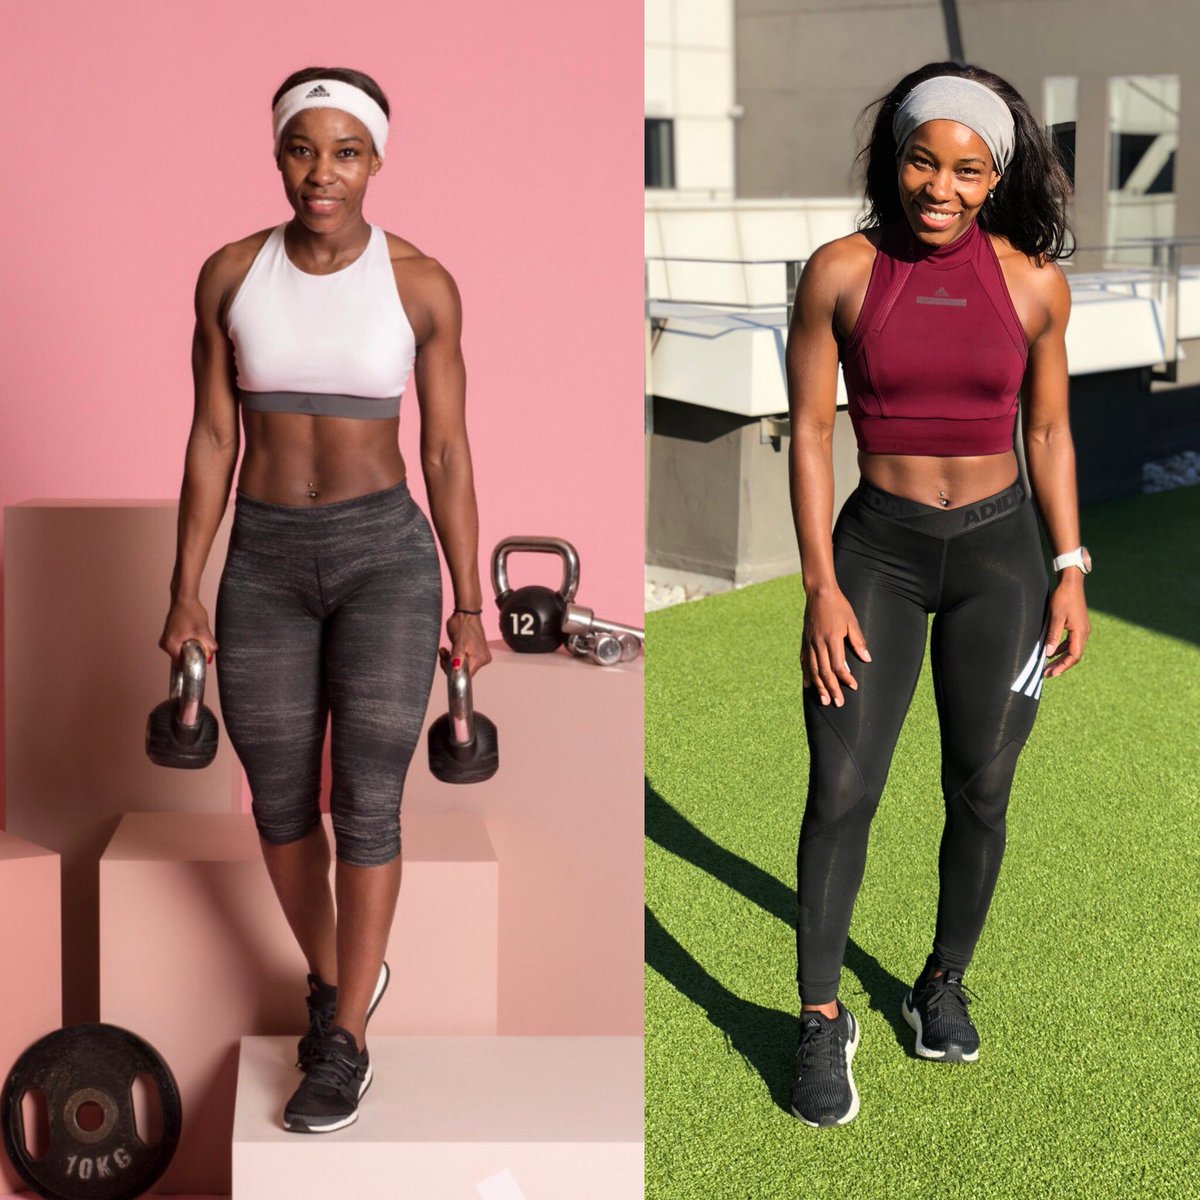 July 2017 vs July 2019
Pure definition of consistency🏋🏾‍♀️🏃🏾‍♀️💃🏽
#tbt #queenfitnass #consistency #heretocreate #fitsquad #shieldready #fitnessjourney #fitnessmotivation #fitnesslifestyle #strong #beautiful #fitnesslifestyles #sexy #fitspo #fitfam #blessed #fitnessmodel #grateful